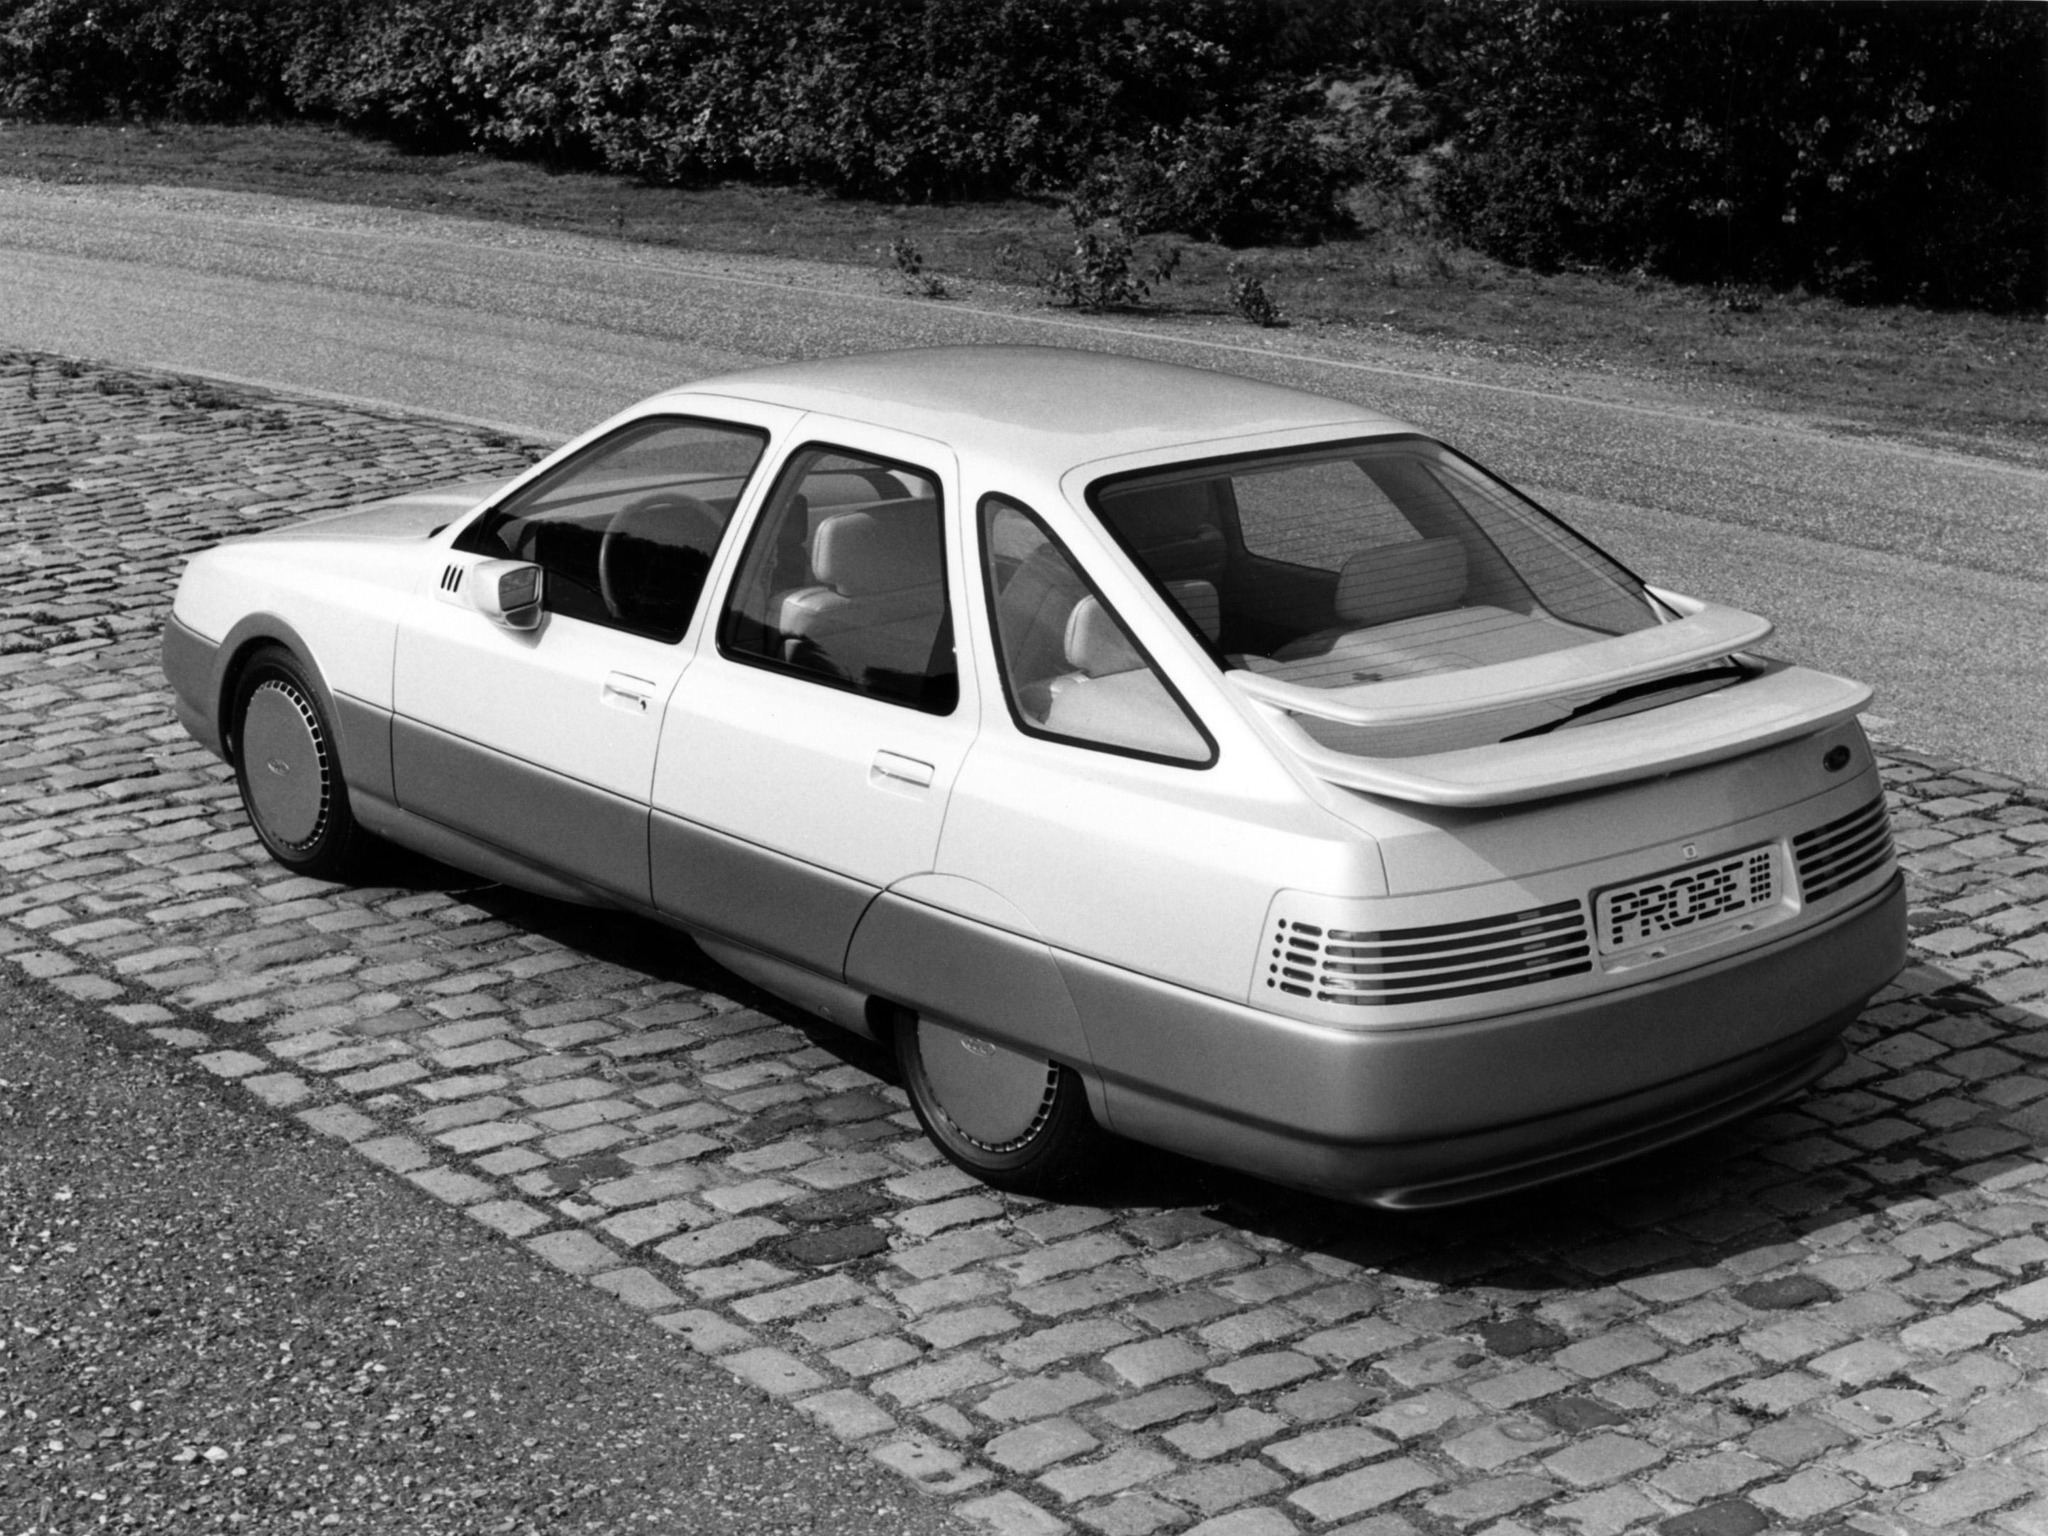 1981 Ford probe iii concept car #4